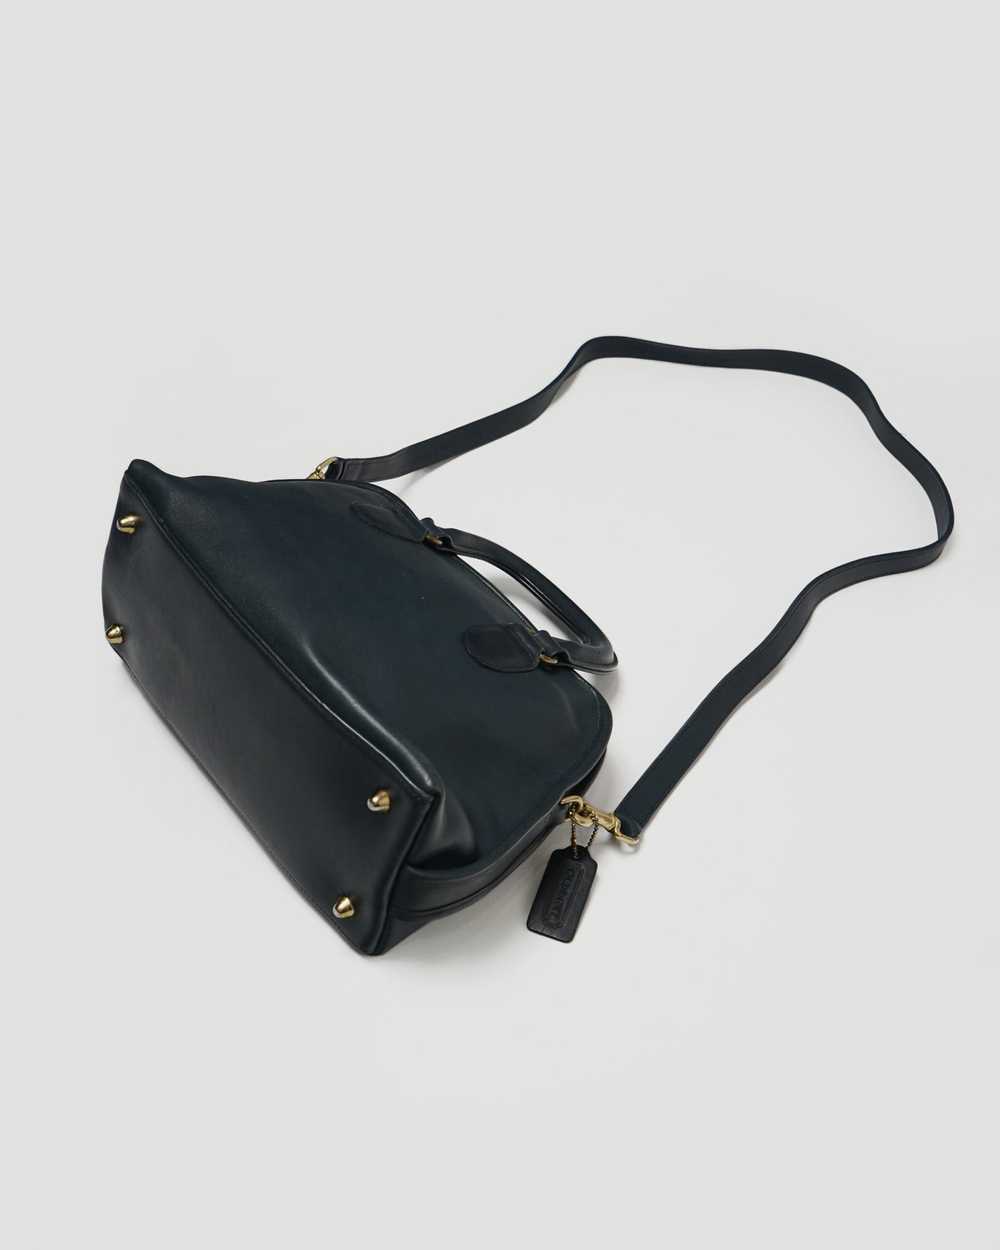 Leather Hand Bag w/ Strap / Navy - image 3